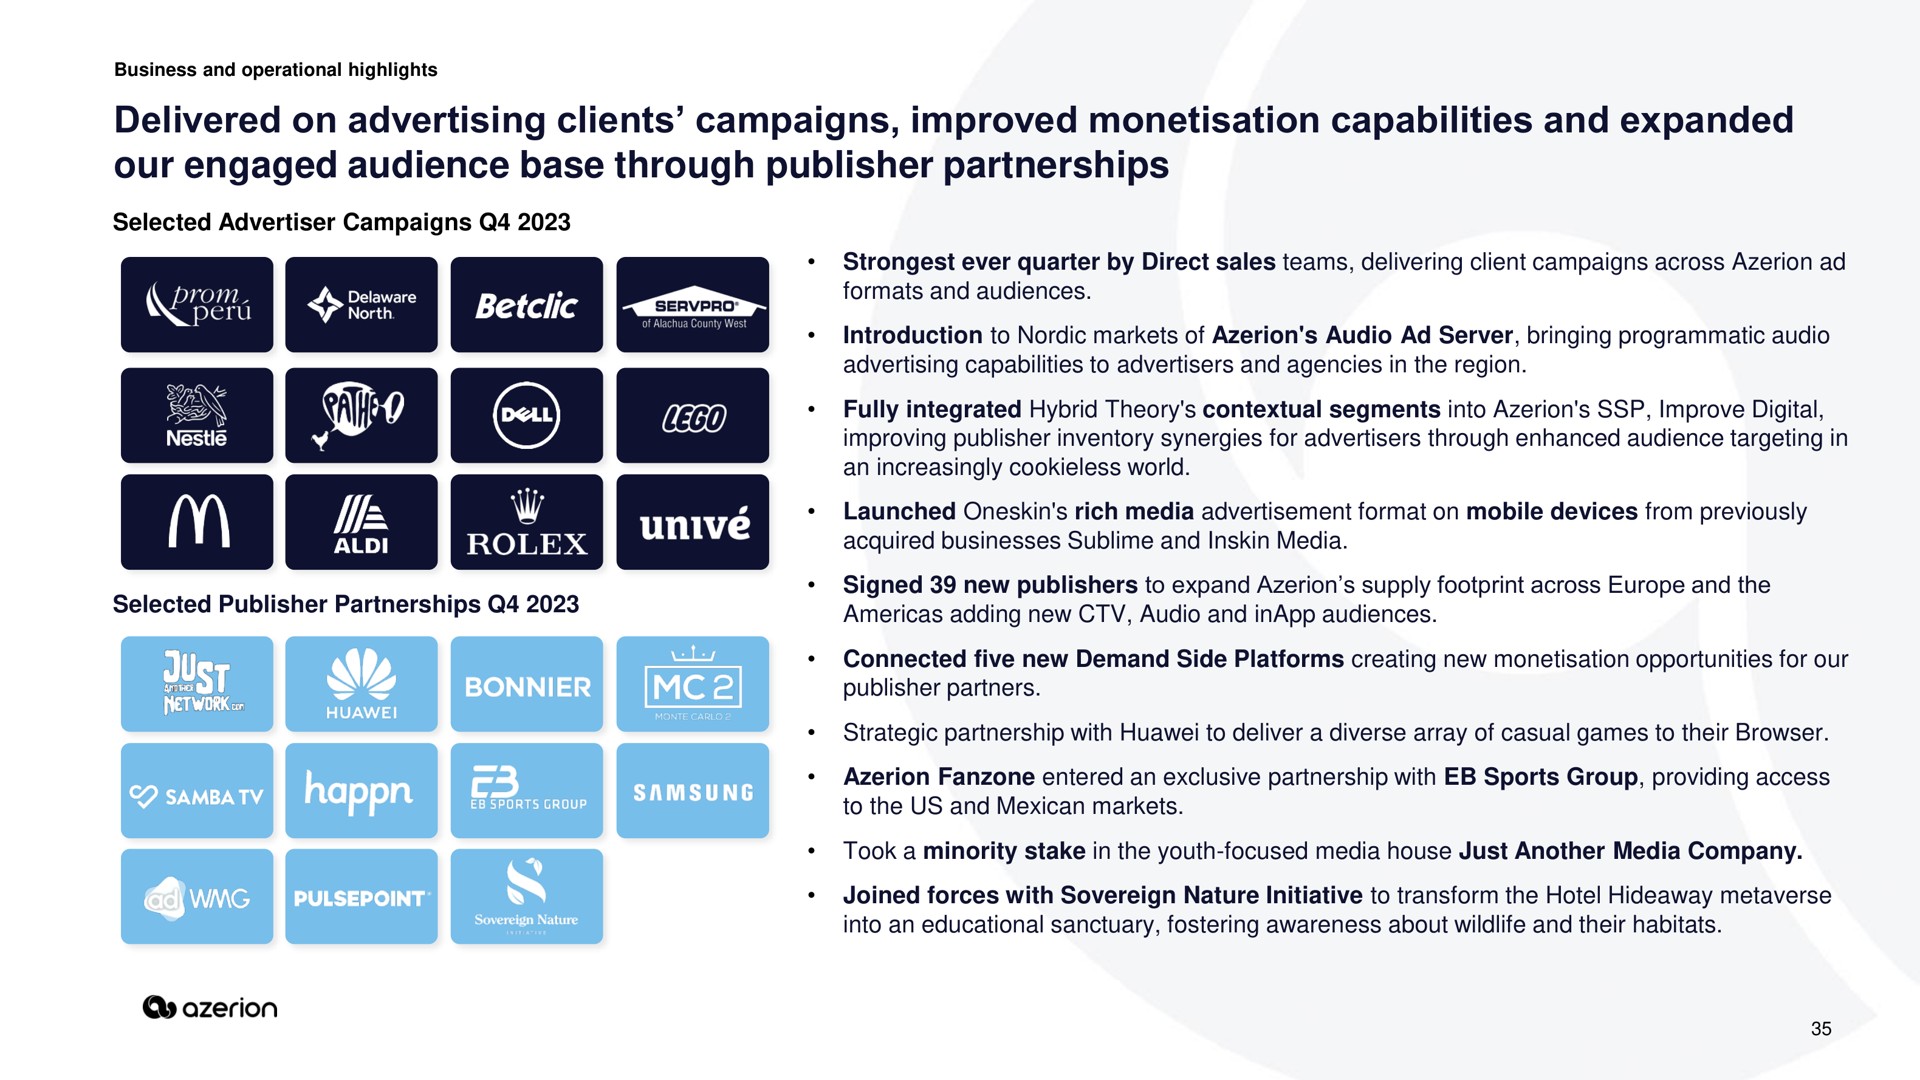 delivered on advertising clients campaigns improved capabilities and expanded our engaged audience base through publisher partnerships | Azerion